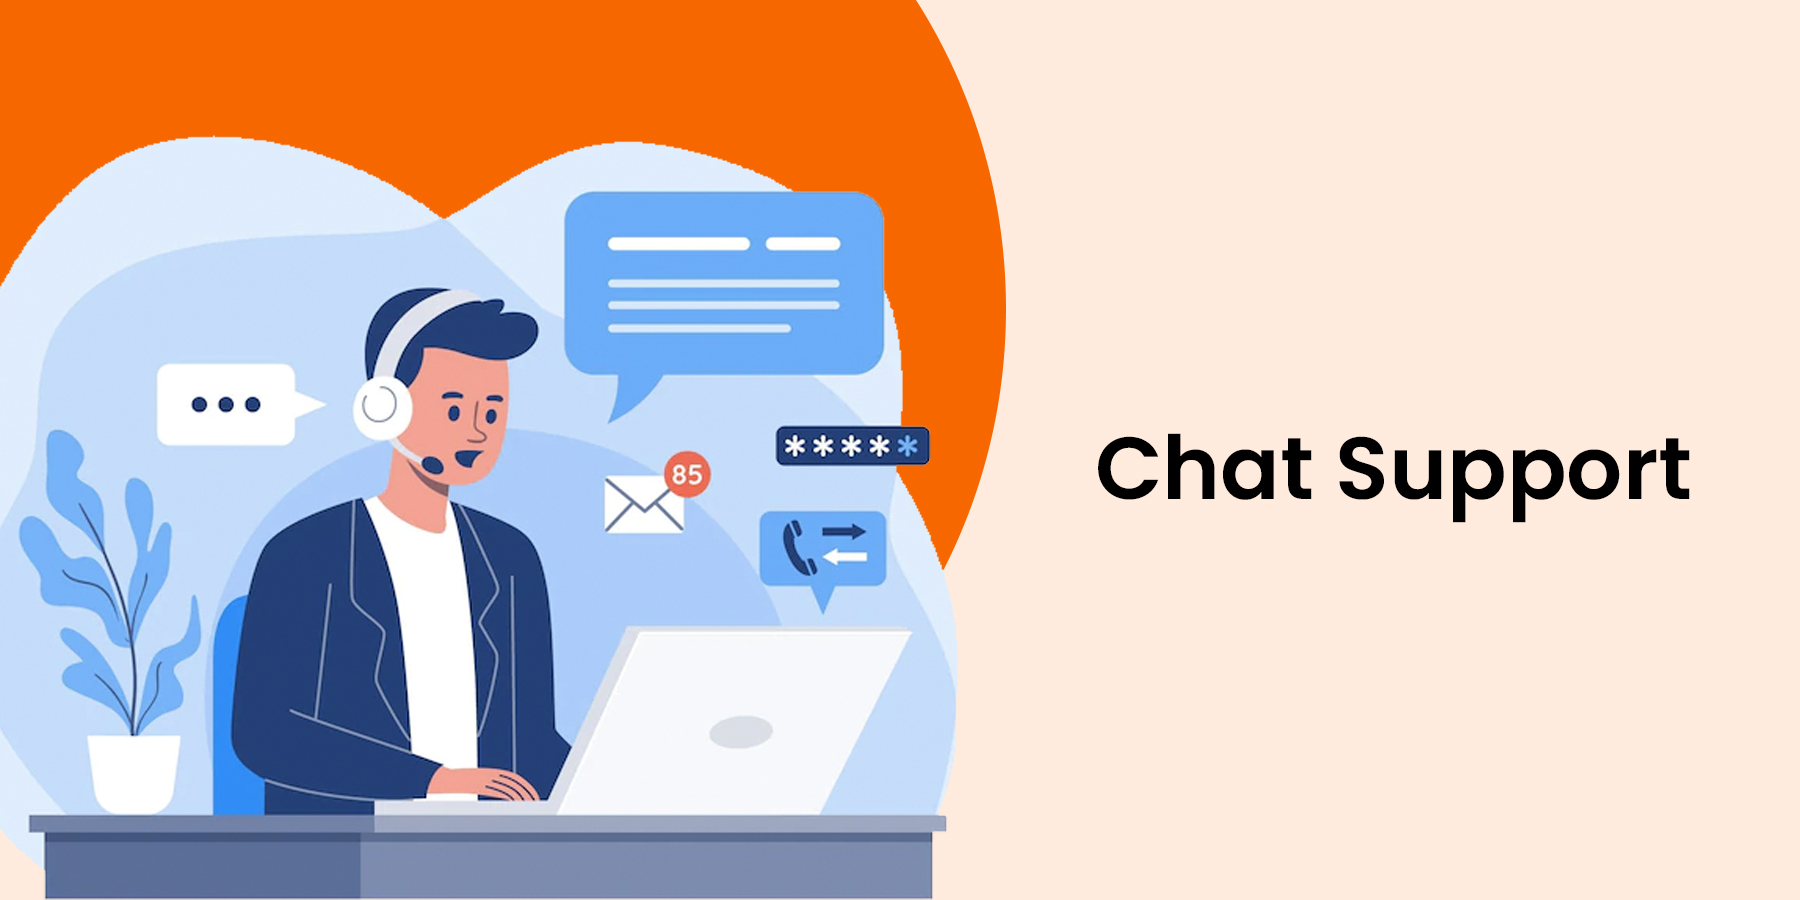 CHAT SUPPORT